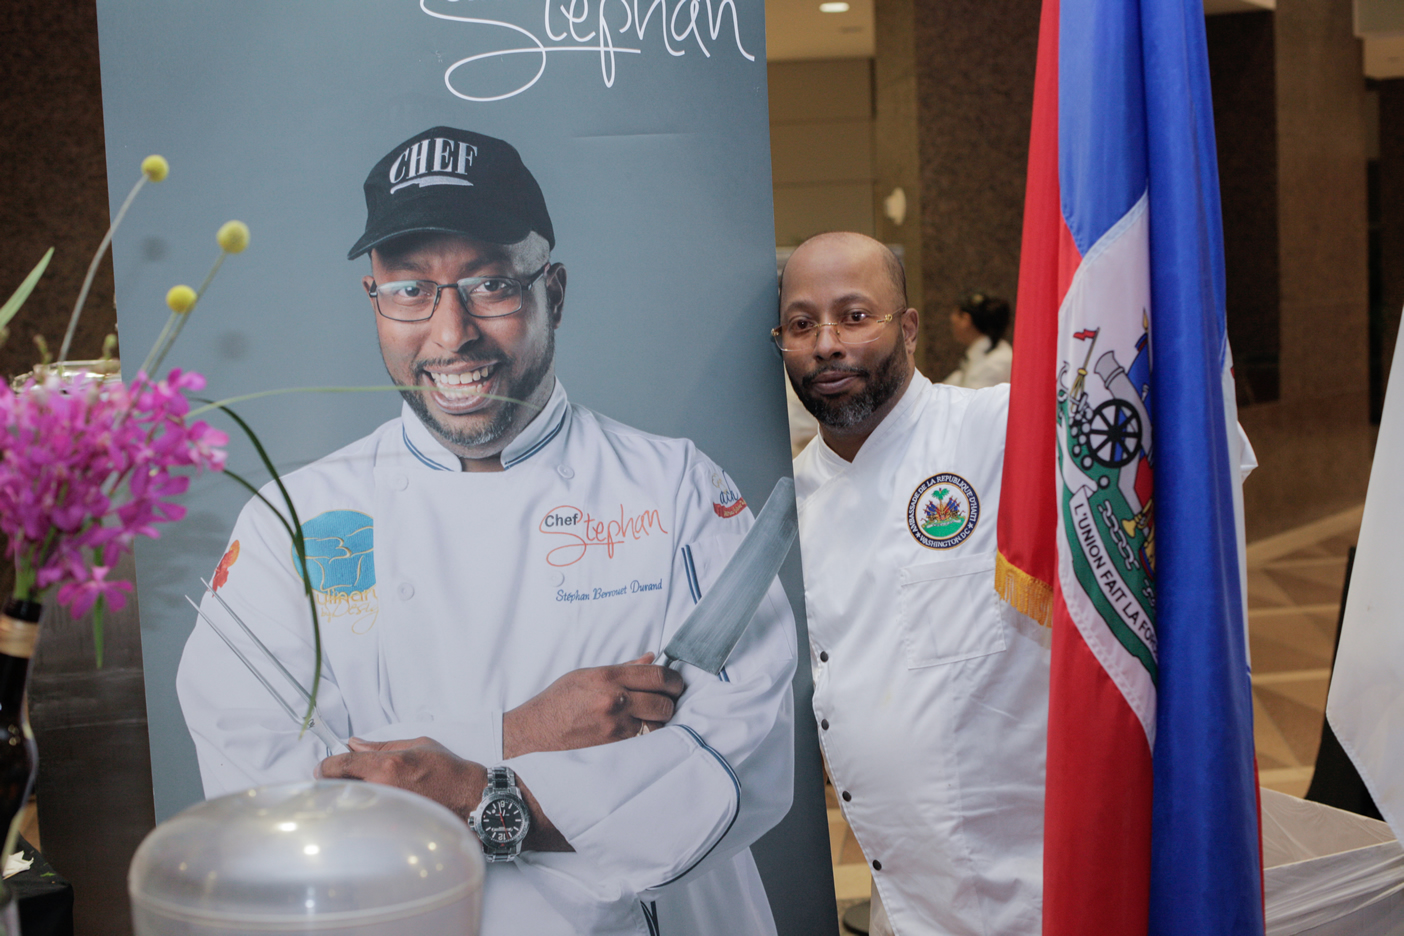 A Culinary Vacation to Haiti at the Embassy Chef Challenge